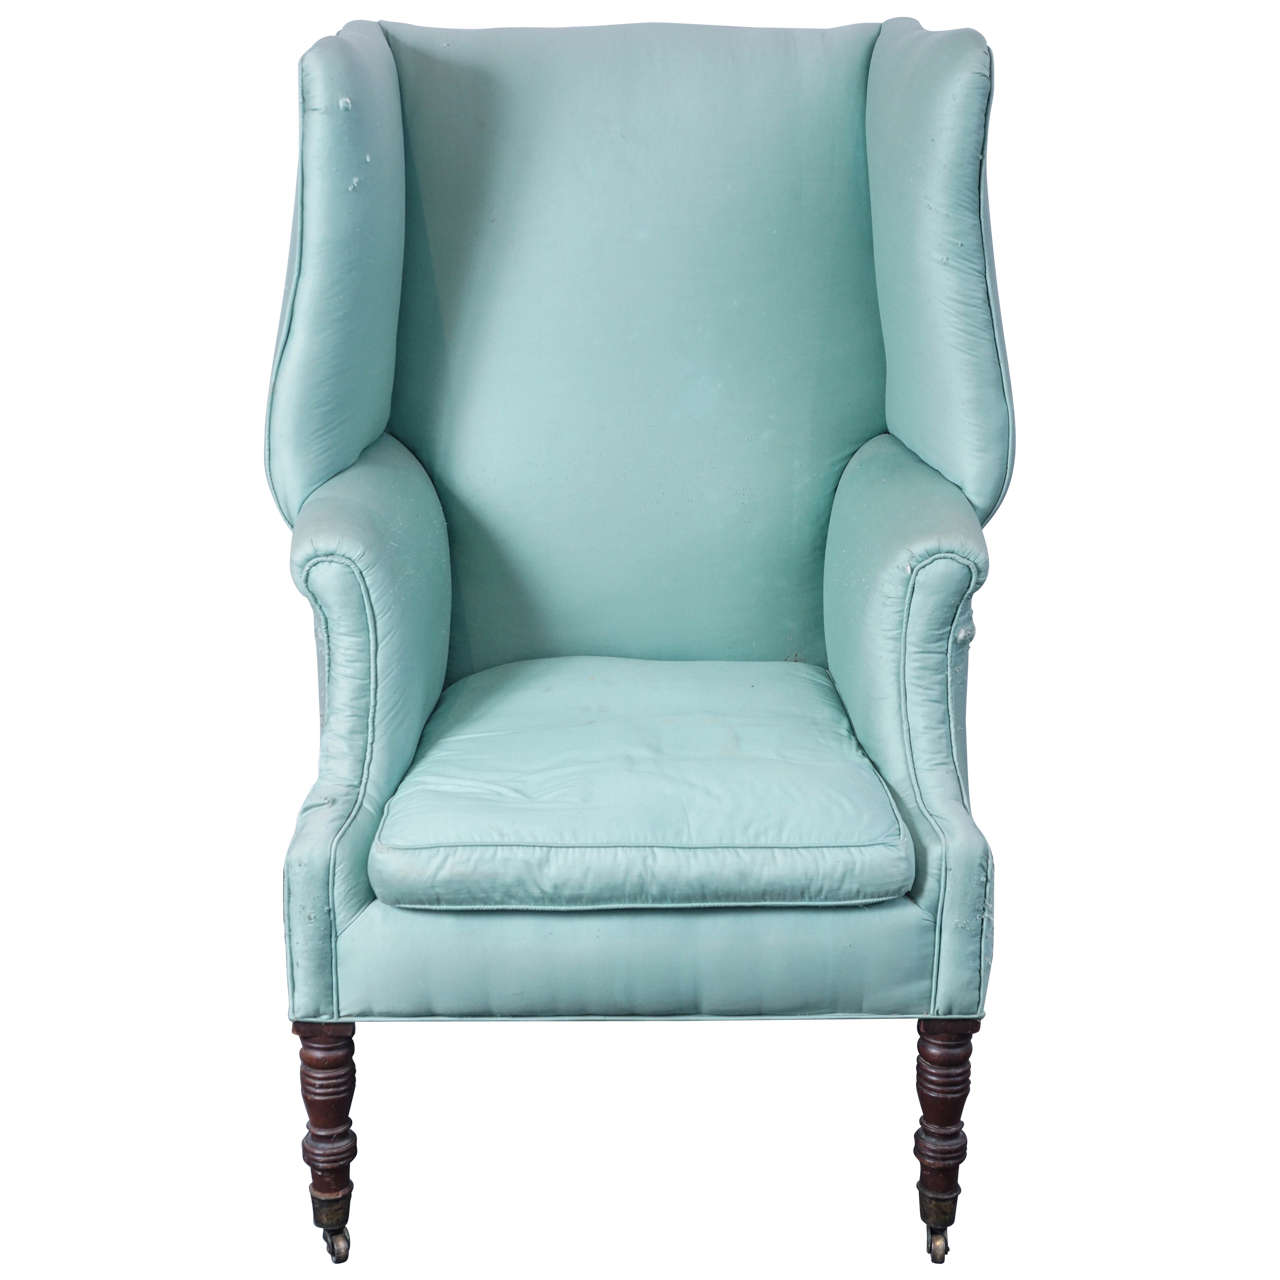 Sublime Upright 19th Century Wingback Chair